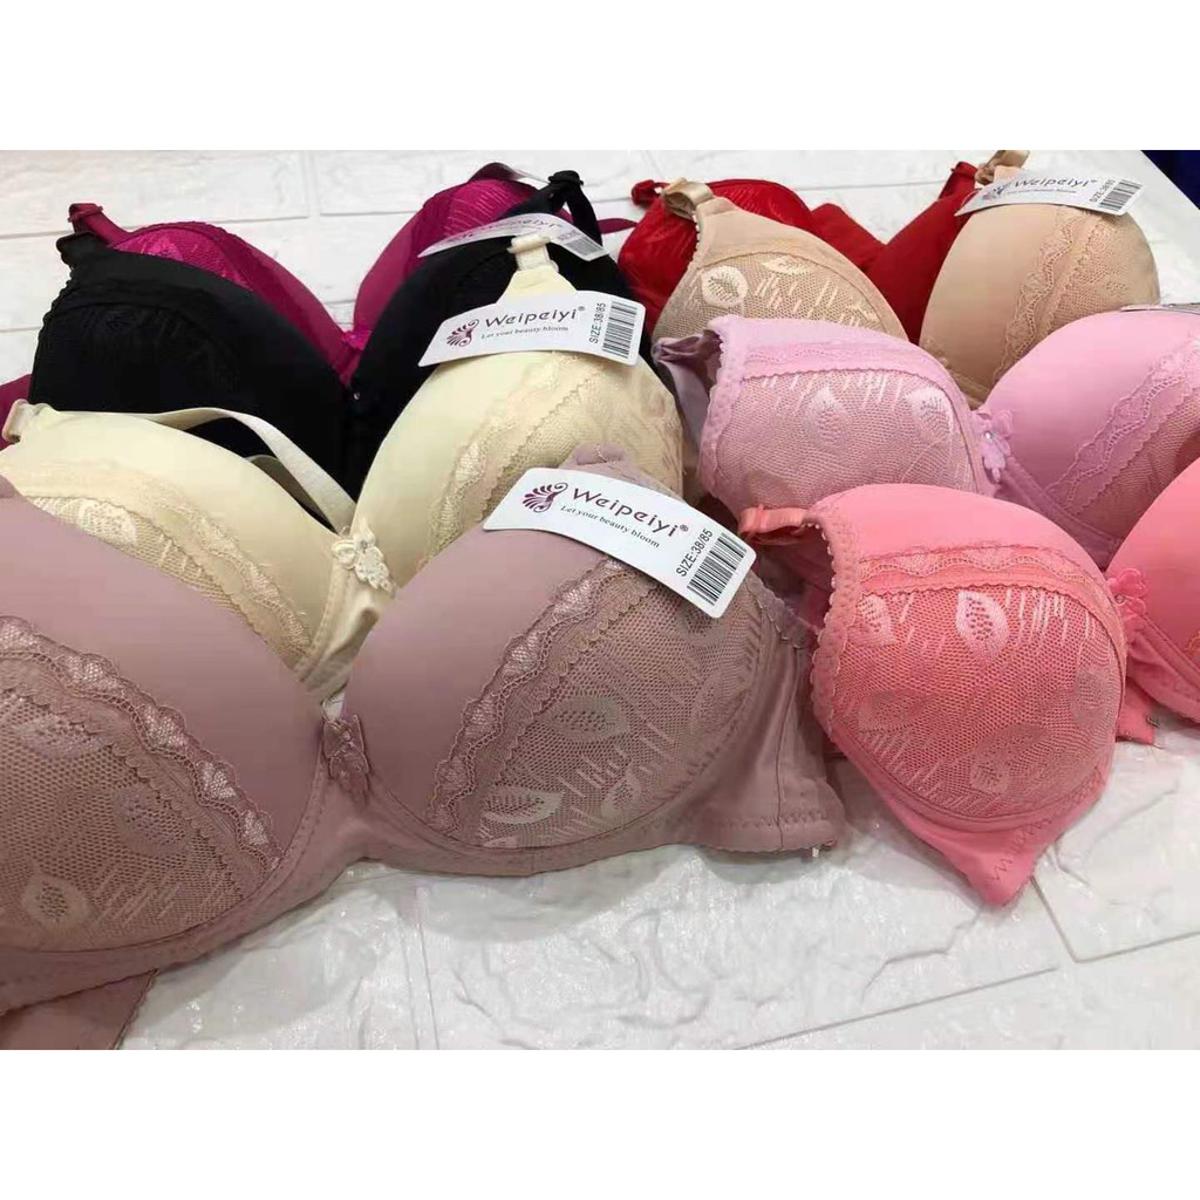 pack of 1-ladies women foam bra, (size 32 to 42), high quality product,  excellent hot look foam brazier, high quality foam bra